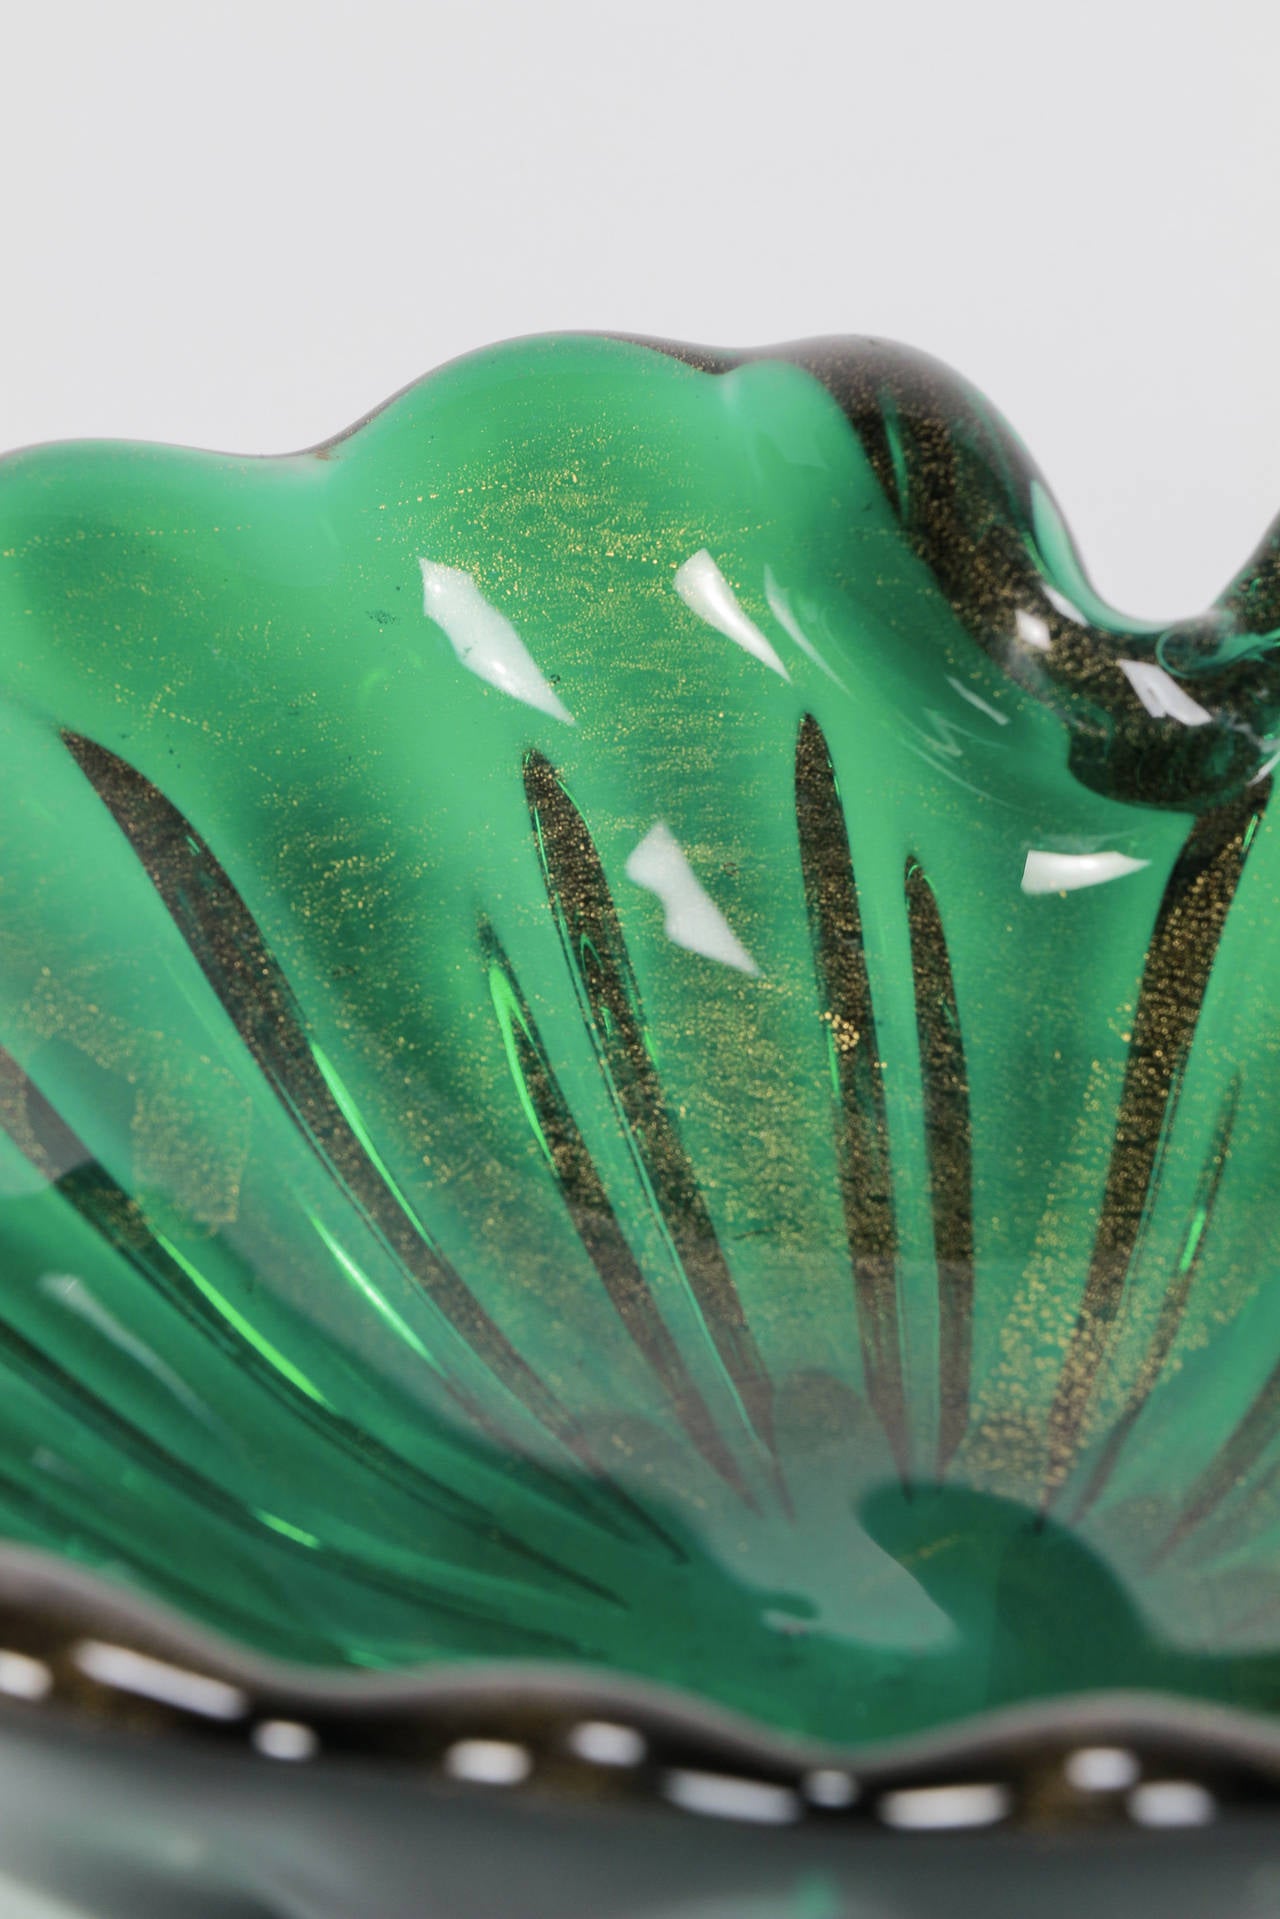 Mid-20th Century Green Gold Italian Murano Shell Bowl in the style of Barovier & Toso, 1960s For Sale